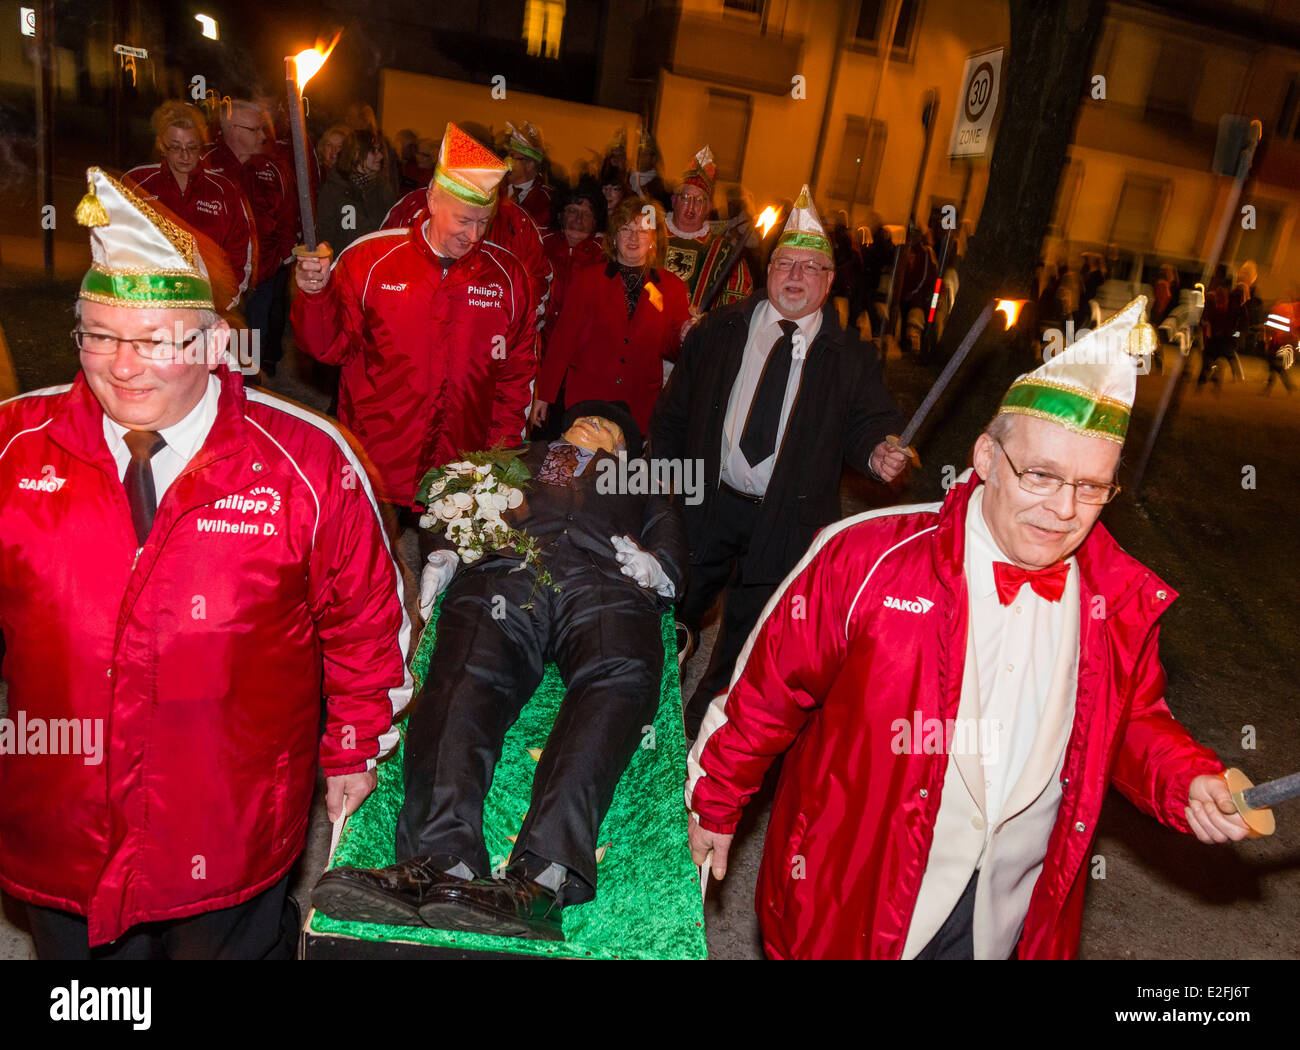 German carnival revelers in good mood carry the deceased Bacchus dummy to his cremation burial with a torchlight procession. Stock Photo